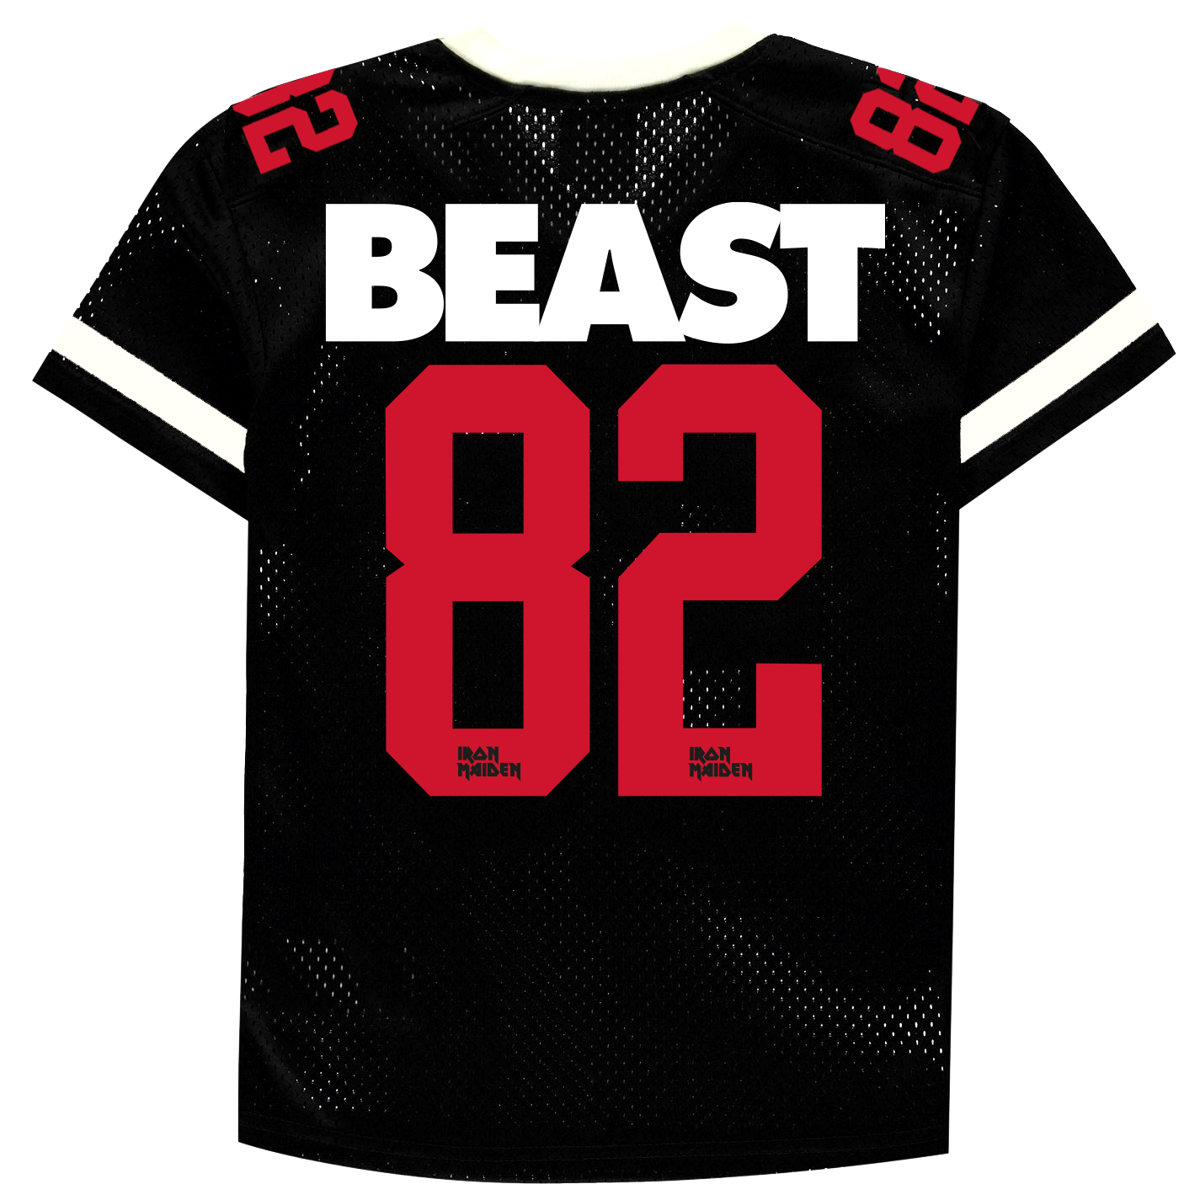 Number of the Beast American Football Shirt - Iron Maiden Store